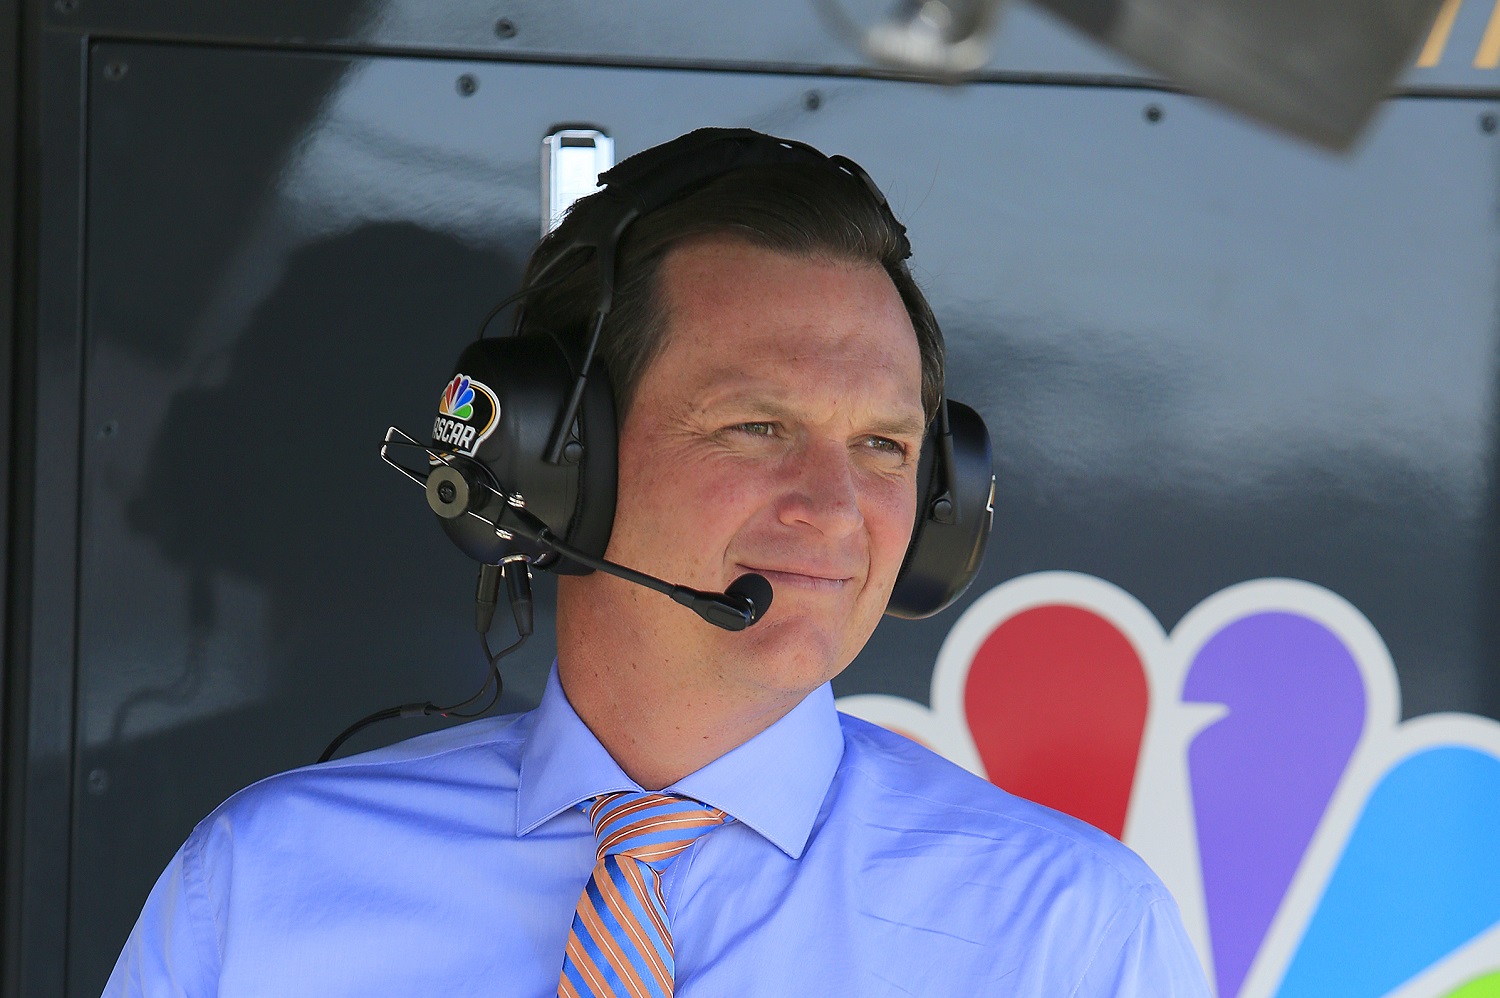 Steve Letarte of NBC during the running of the 1000Bulbs.com Monster Energy NASCAR Cup Series Race on Oct. 14, 2018 at the Talladega Superspeedway. | David J. Griffin/Icon Sportswire via Getty Images